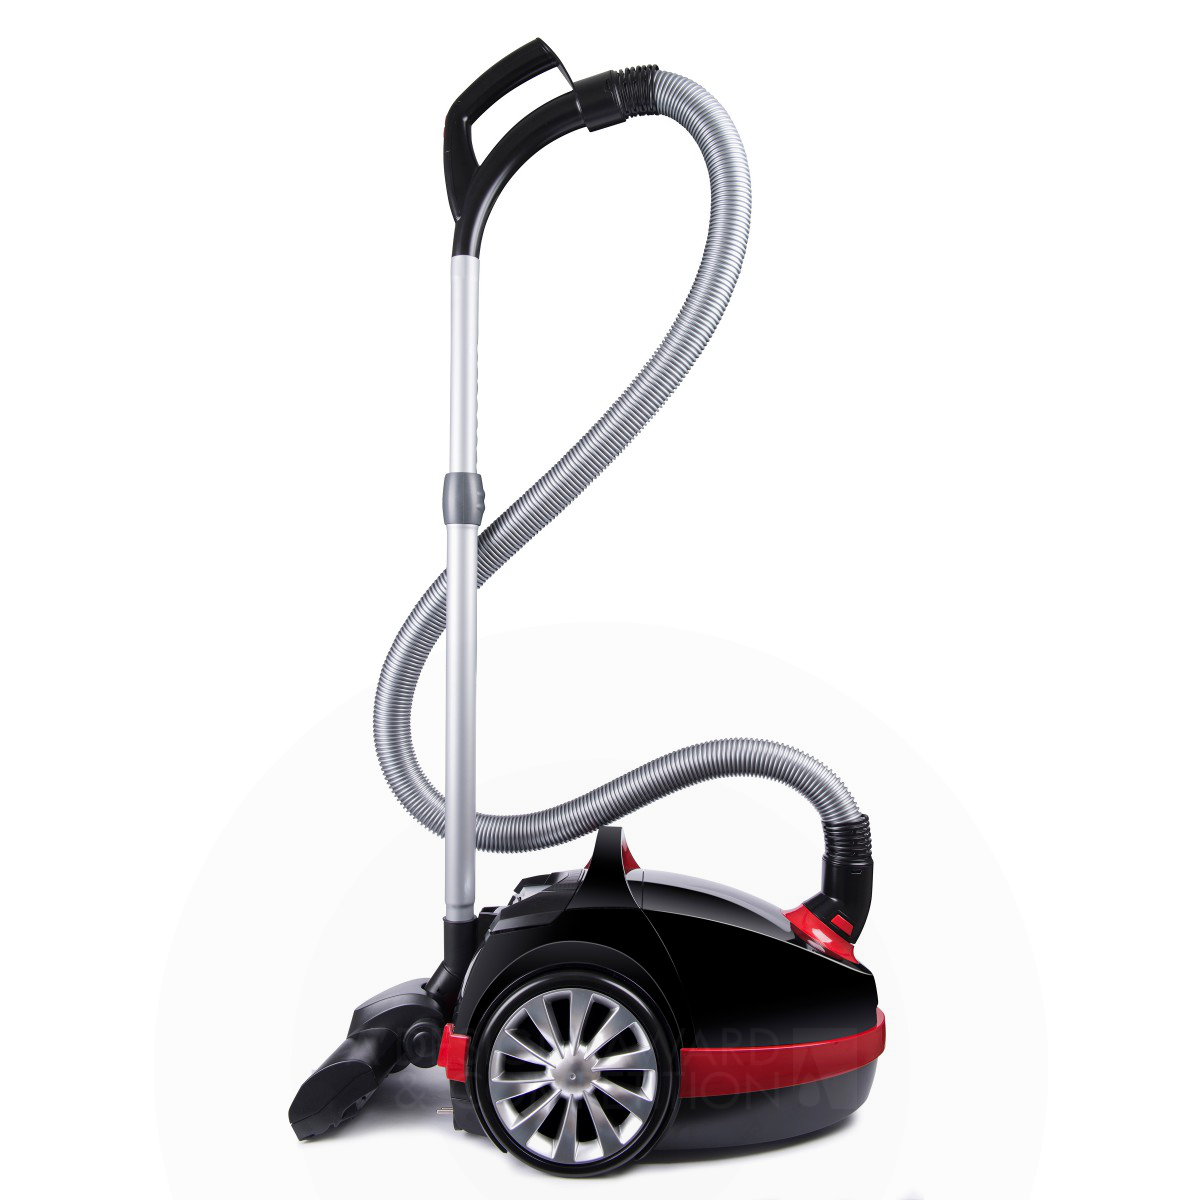 Terra: Redefining Vacuum Cleaning with Innovative Design